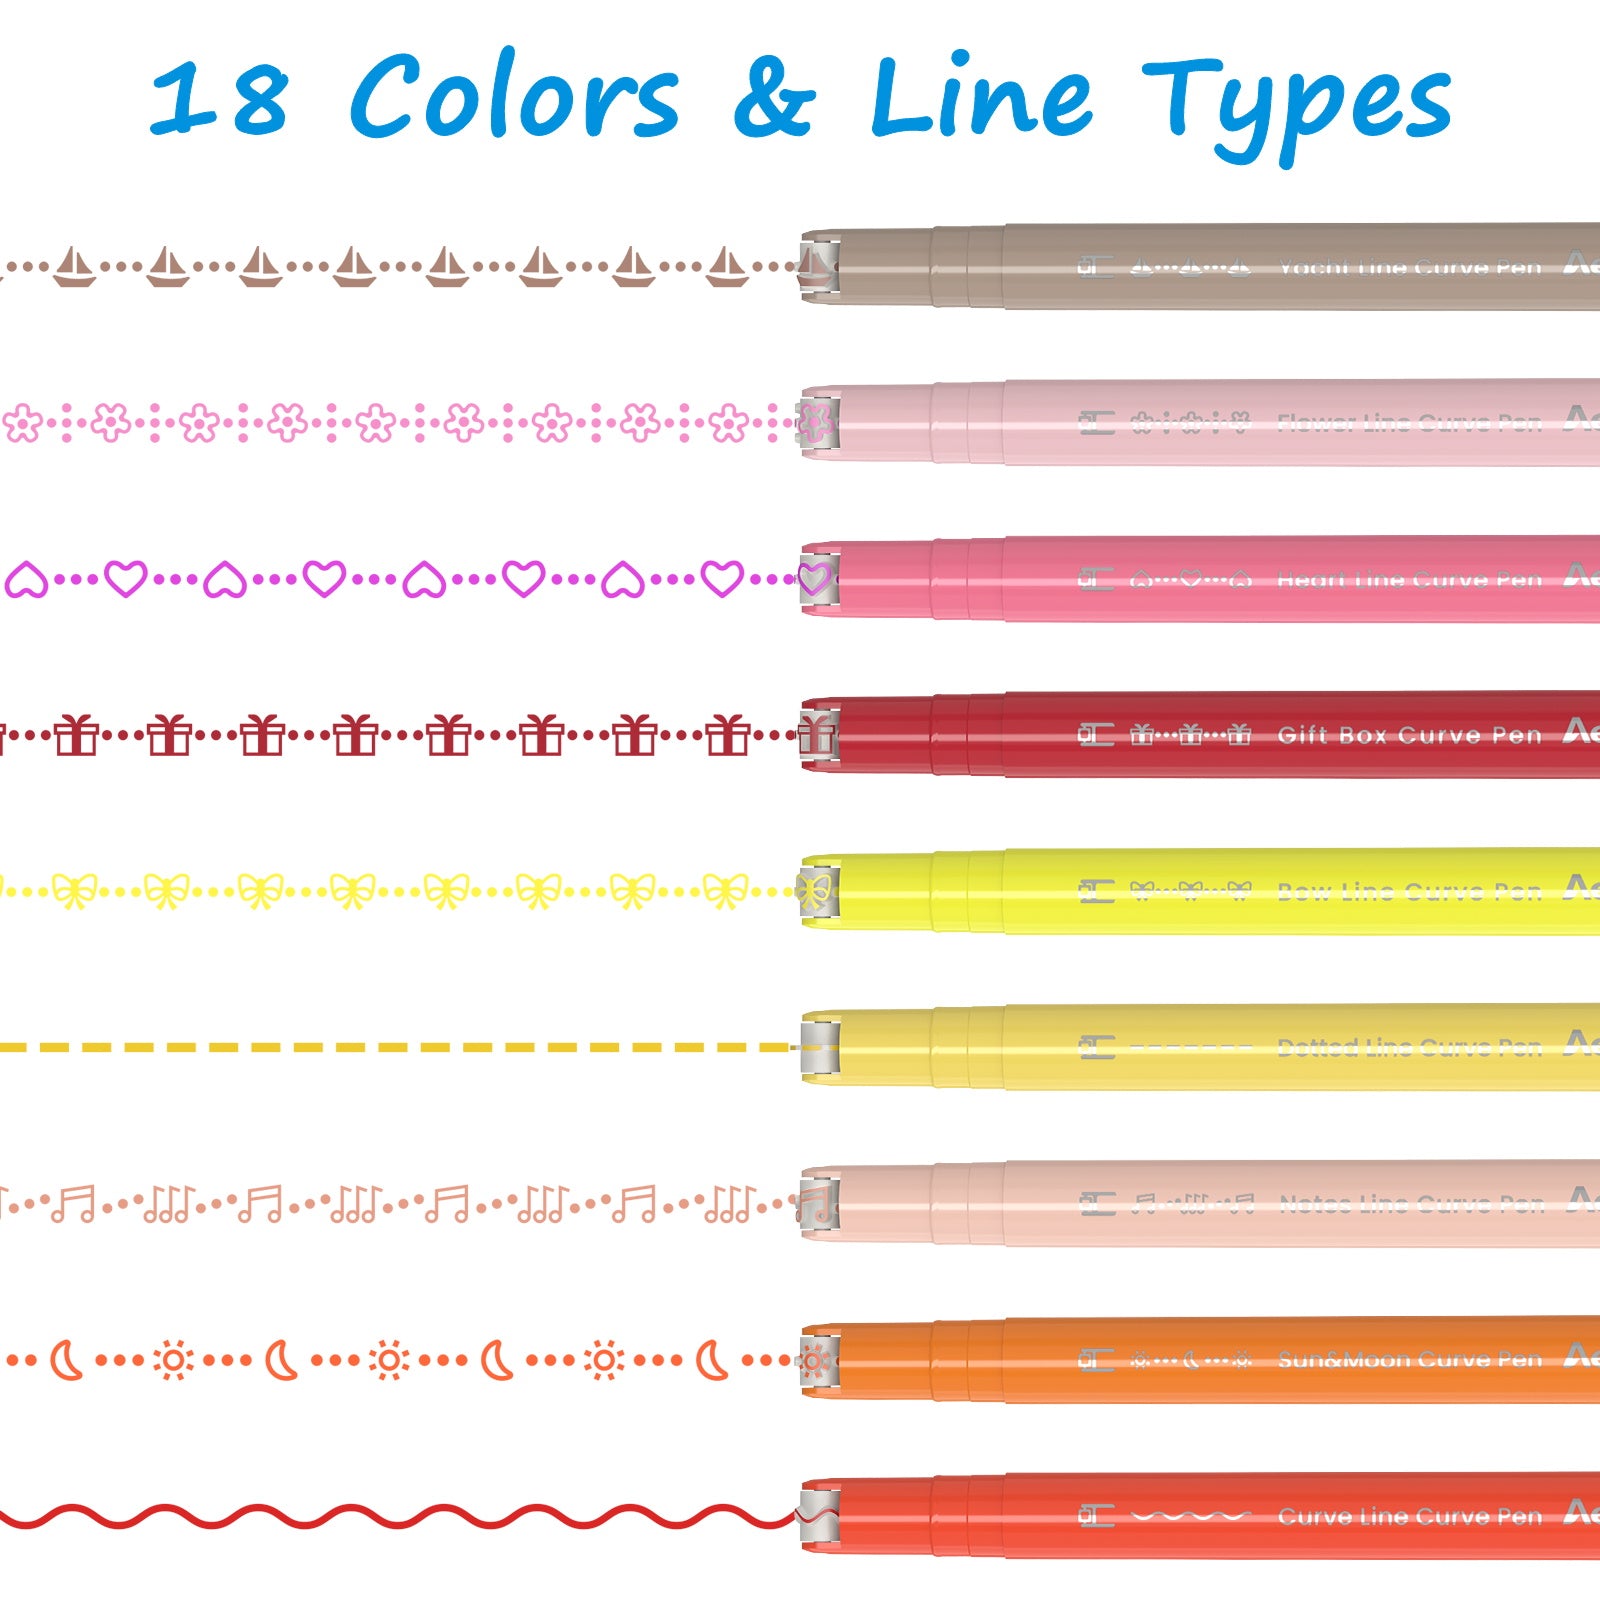 AECHY Colored Drawing Curve Pen Set 18 Colors And 18 different lines